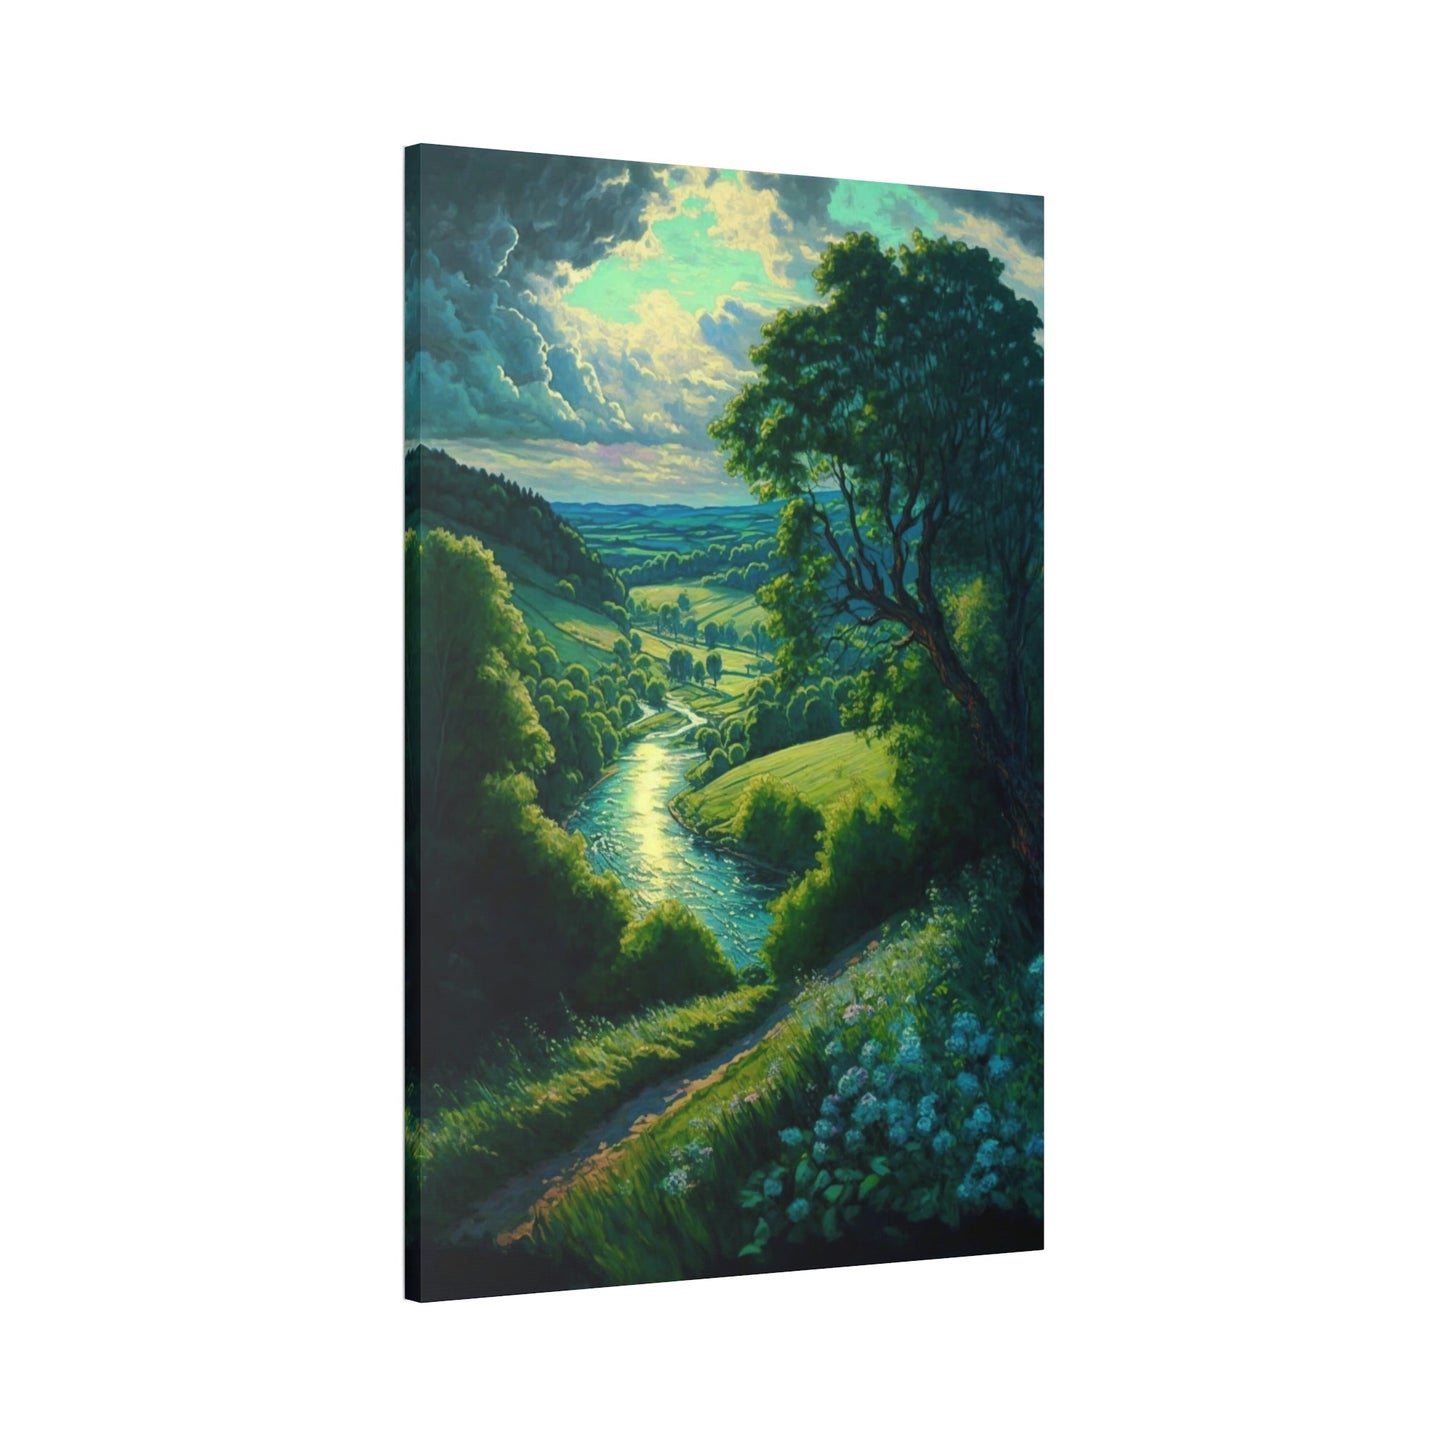 Tranquil Waterscapes: Lakes and Rivers on Canvas and Framed Poster Art